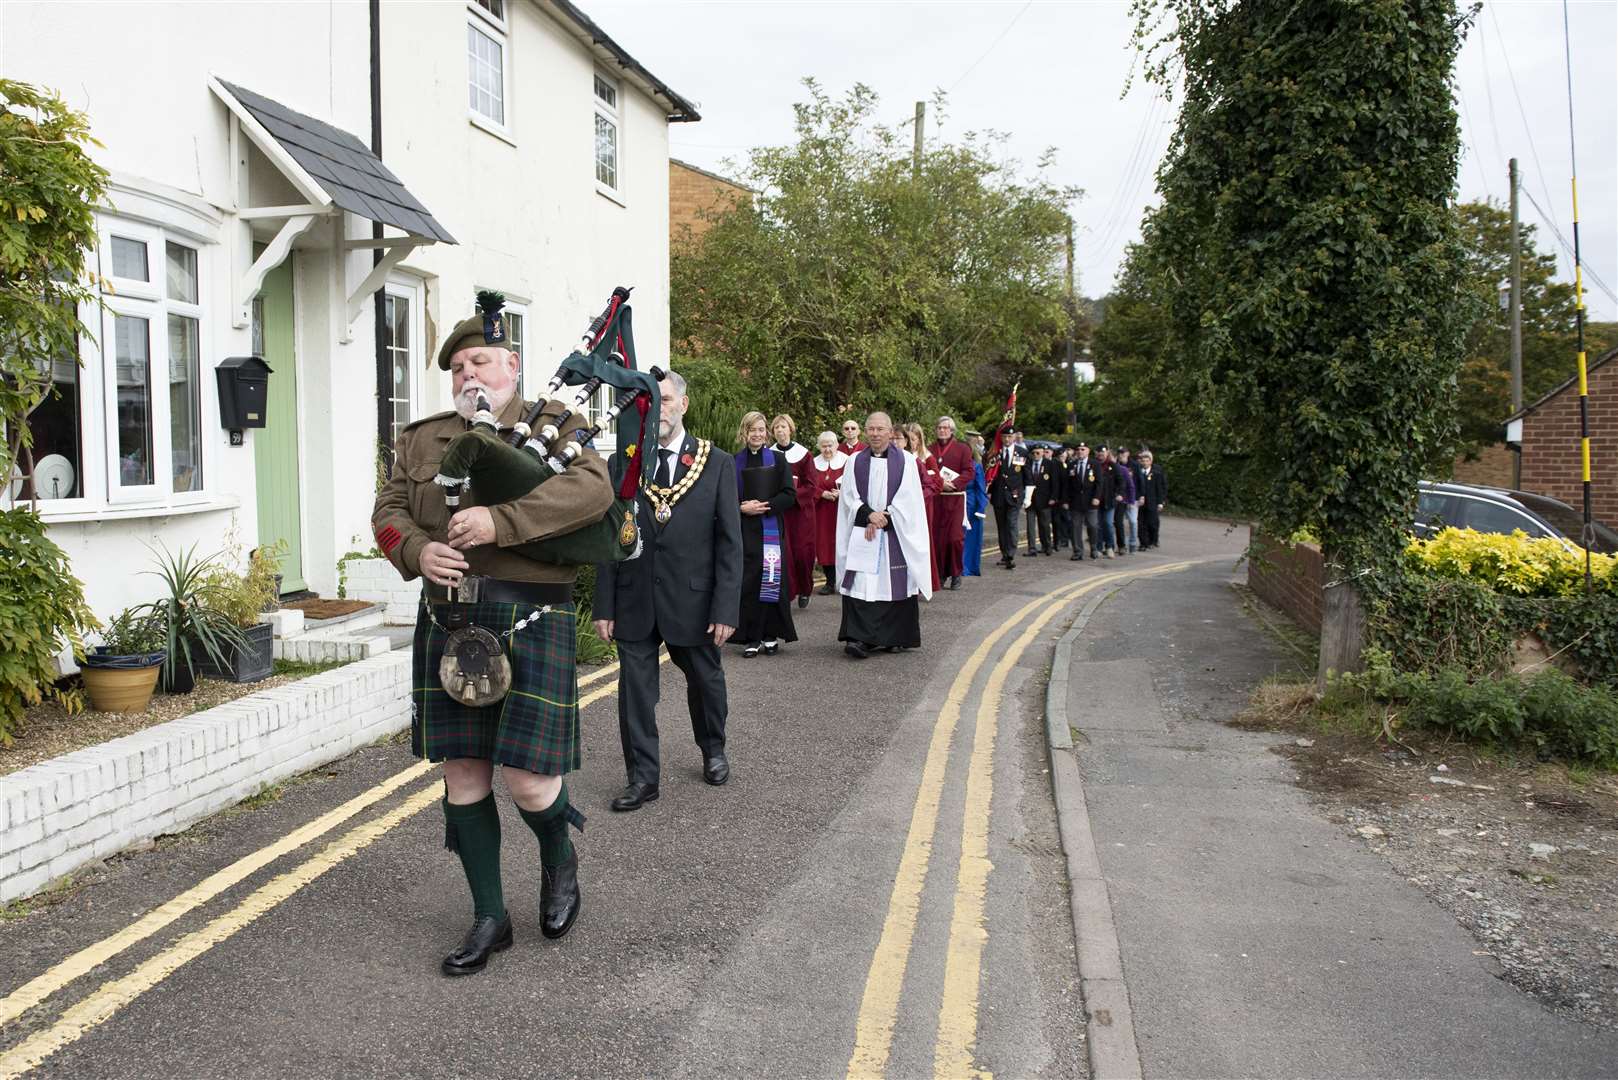 The procession through the village. Picture Tony Pullen